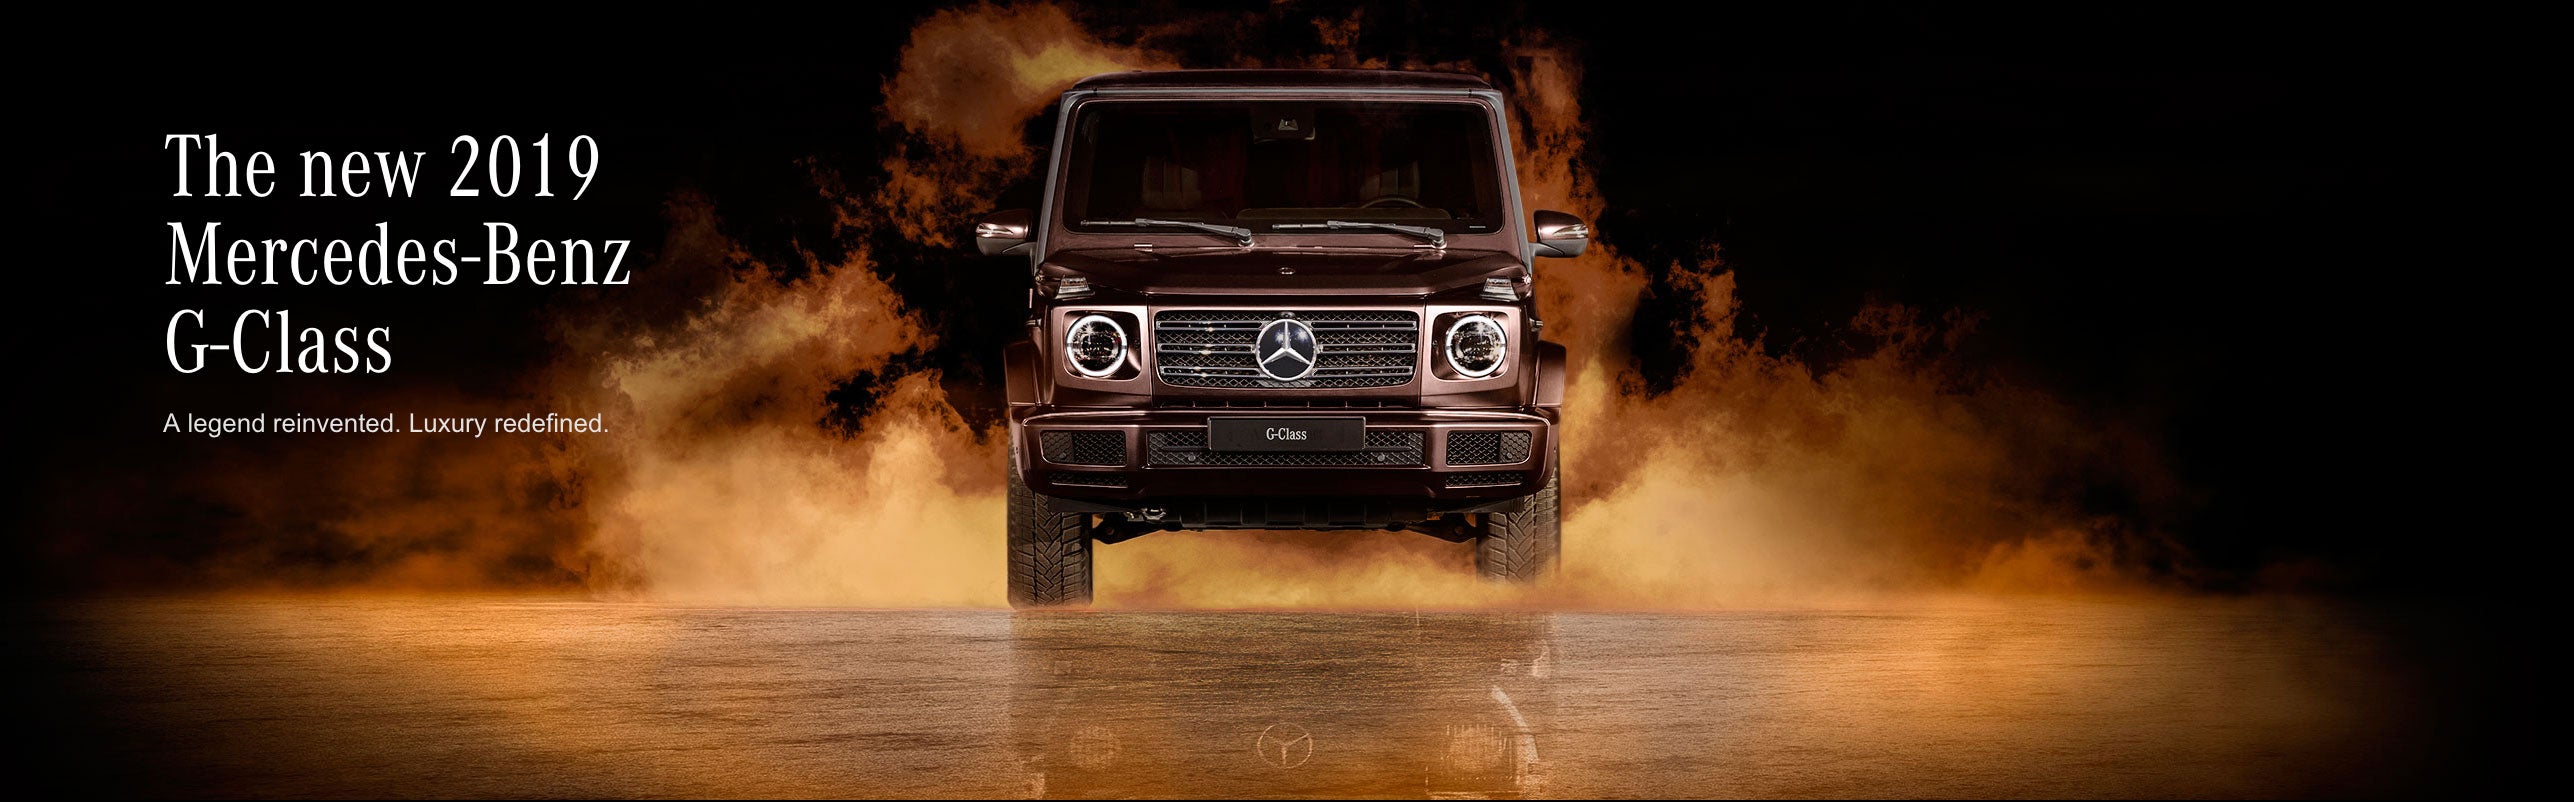 The new 2019 Mercedes-Benz G-Class is coming to Bloomington, Minnesota